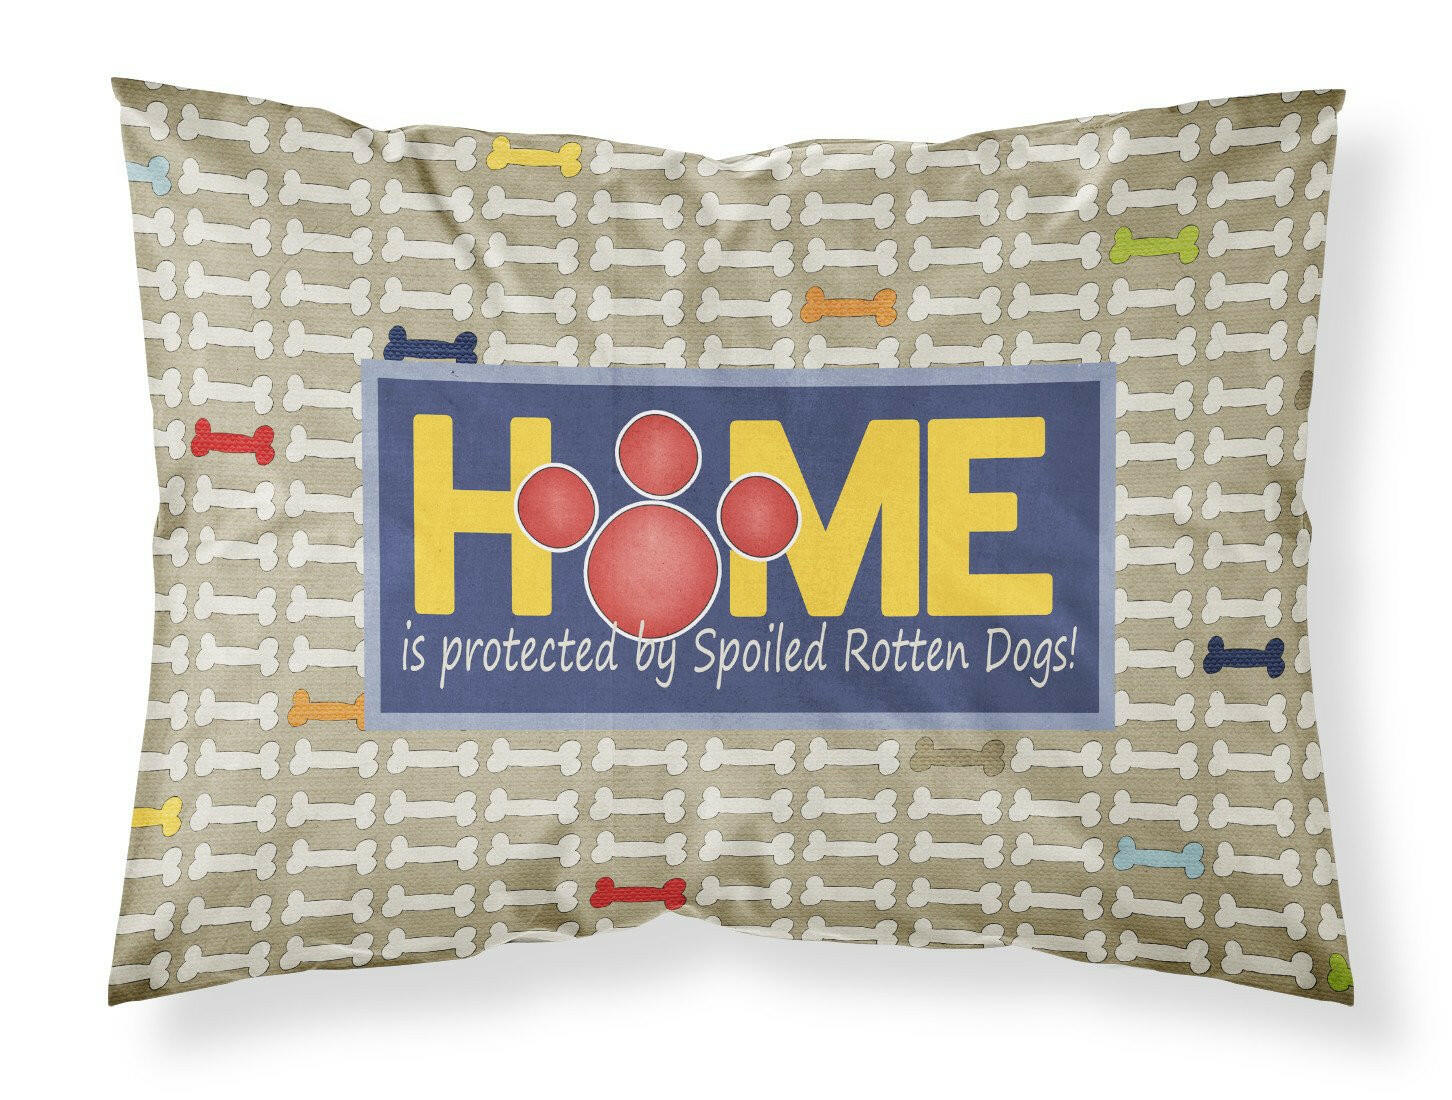 Home is protected by spoiled rotten dogs Moisture wicking Fabric standard pillowcase SB3053PILLOWCASE by Caroline's Treasures